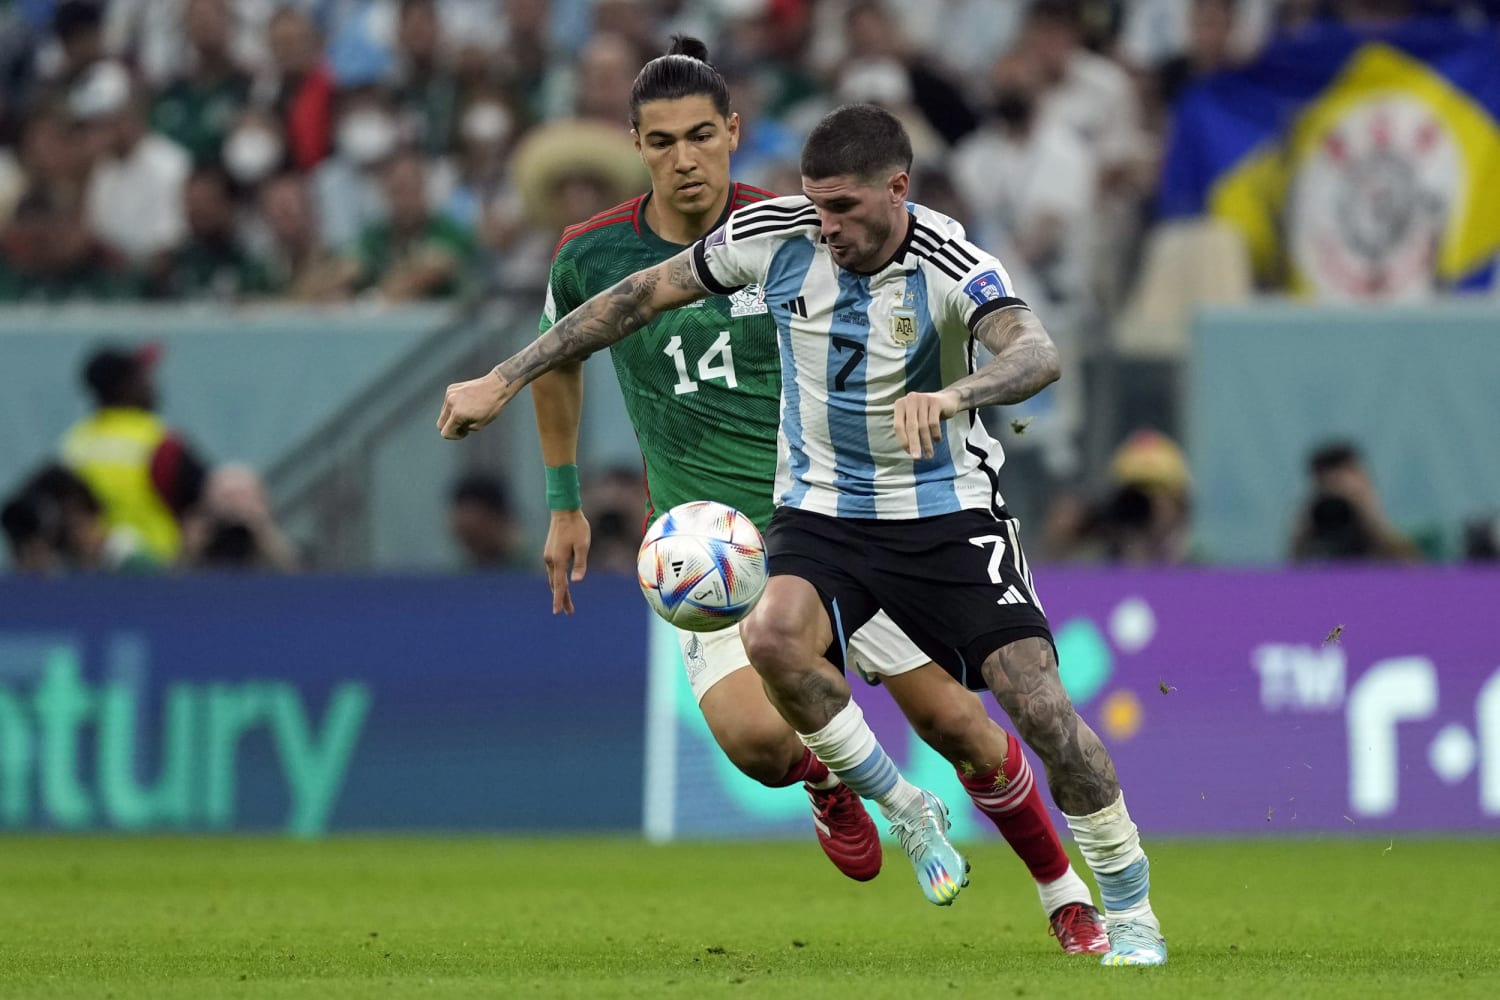 Argentina-Mexico World Cup game makes U.S